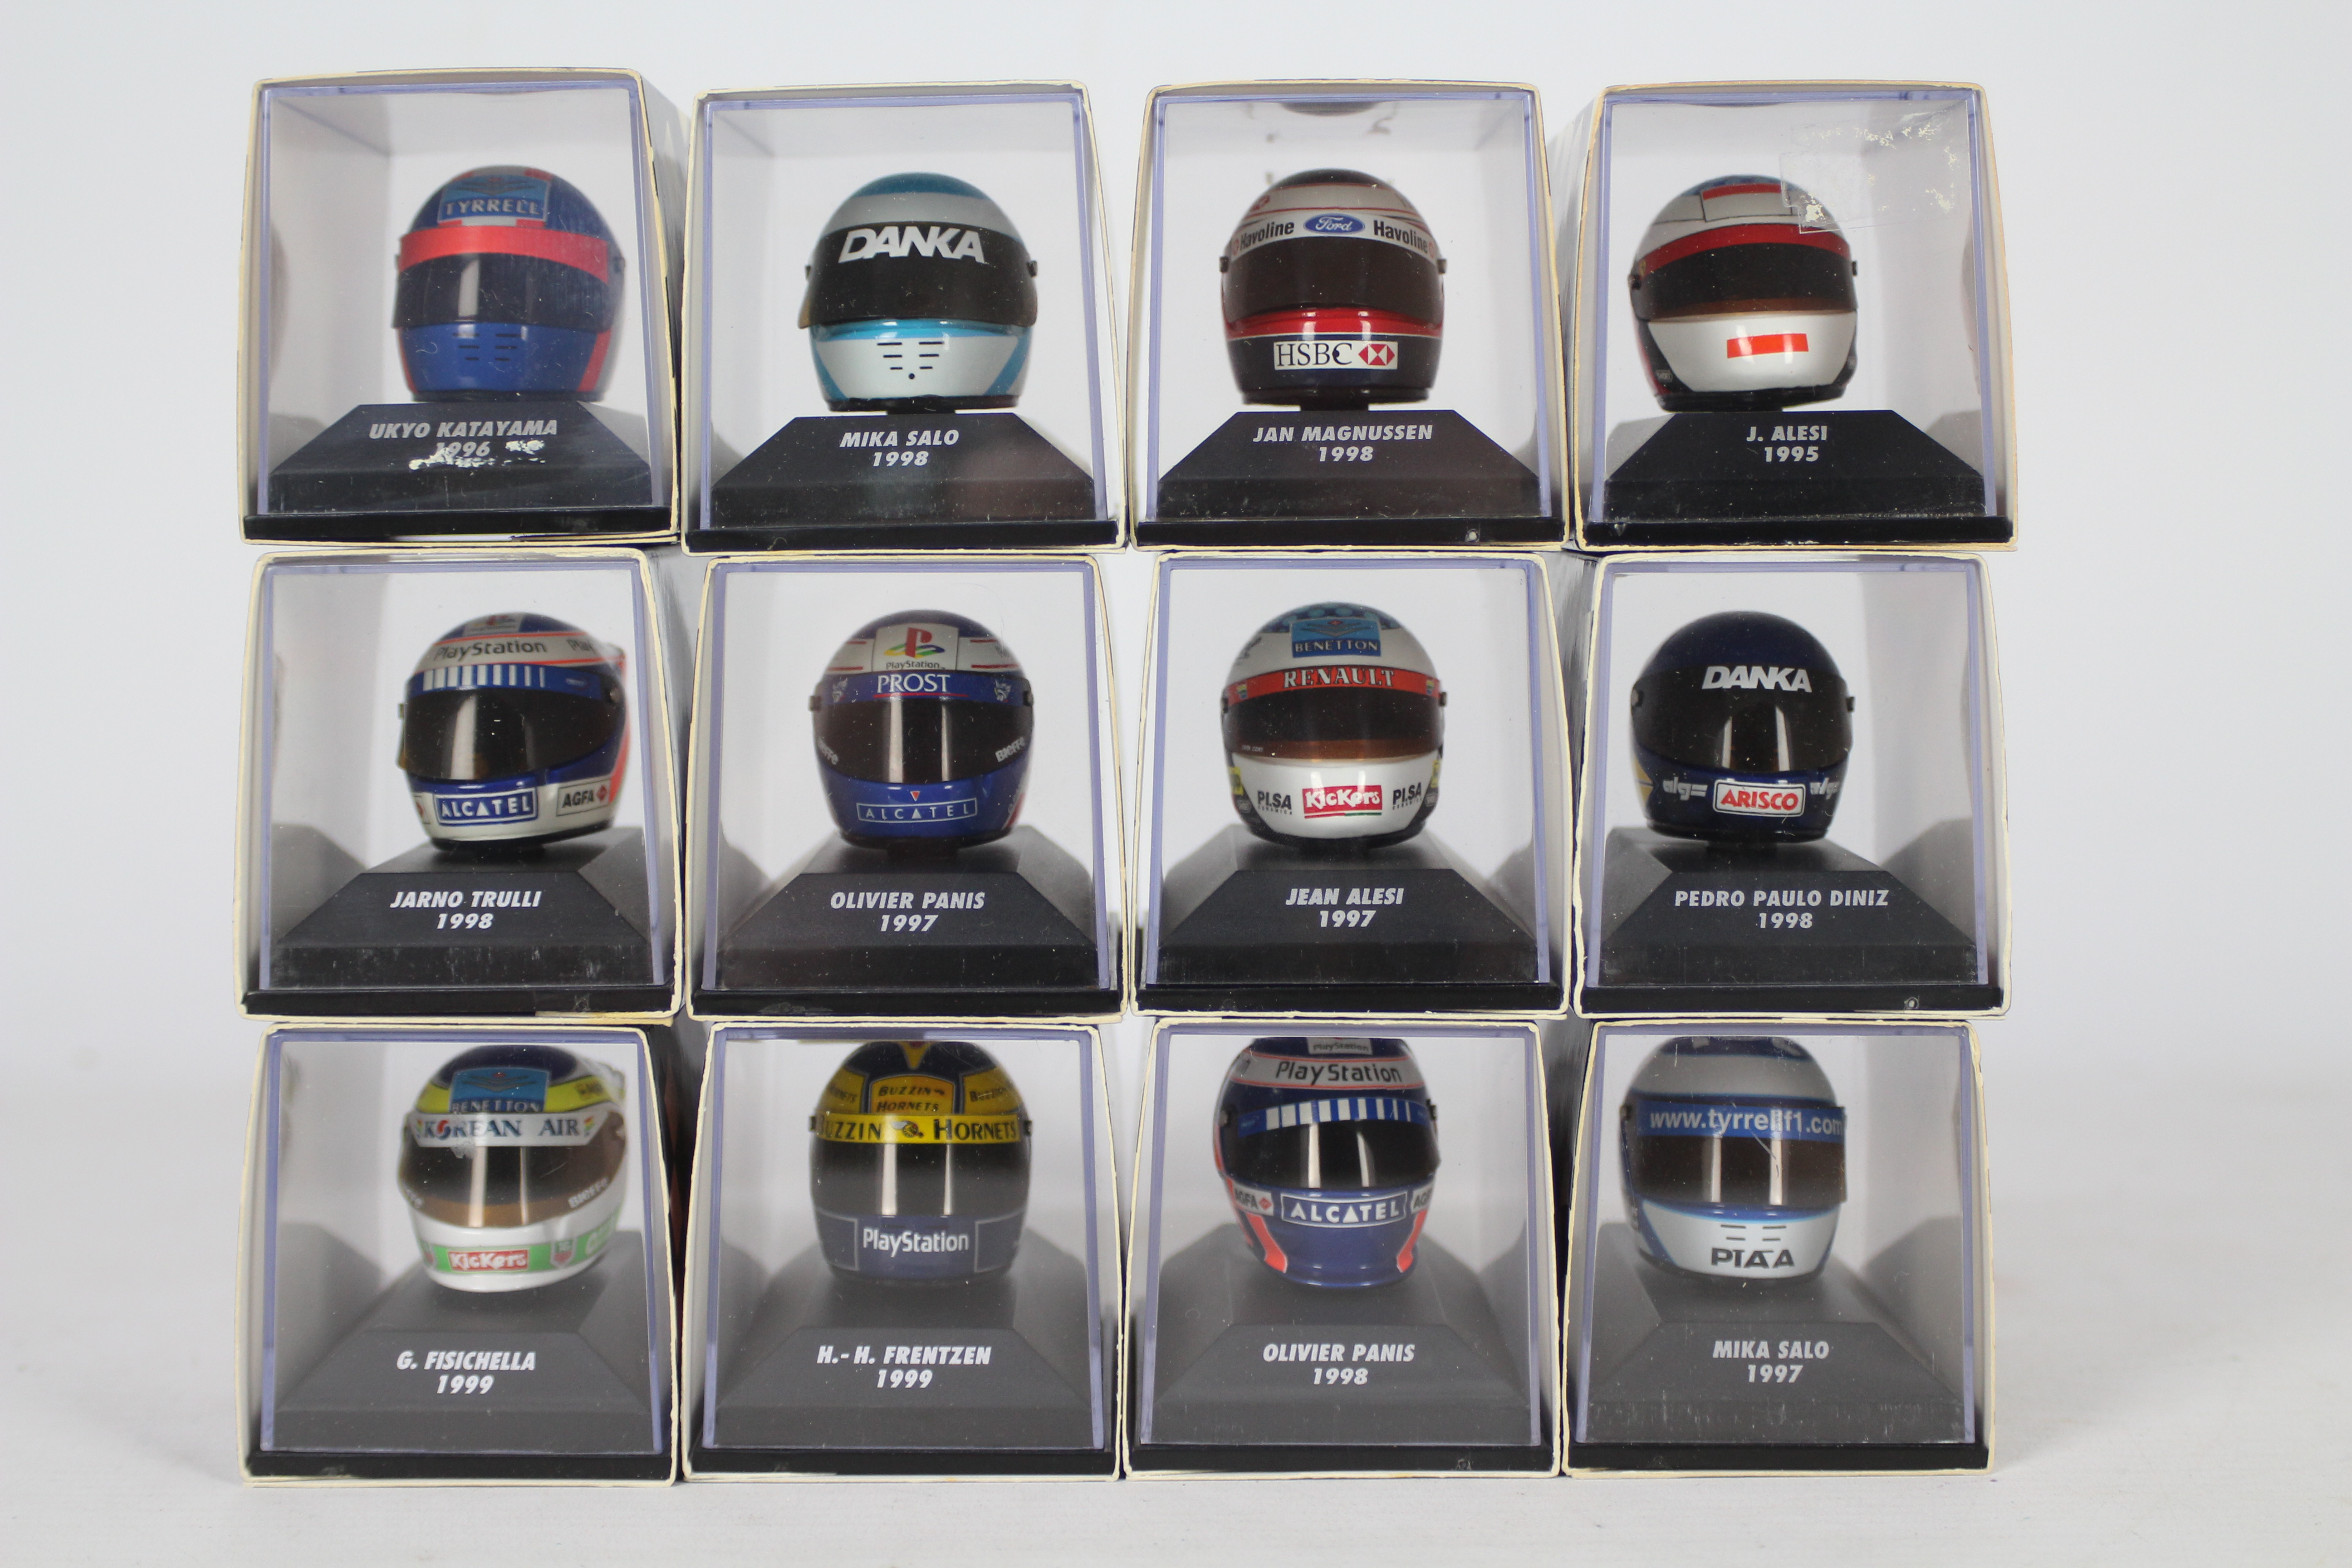 Minichamps - A starting grid of 12 boxed 1:8 scale F1 racing drivers helmets by Minichamps.